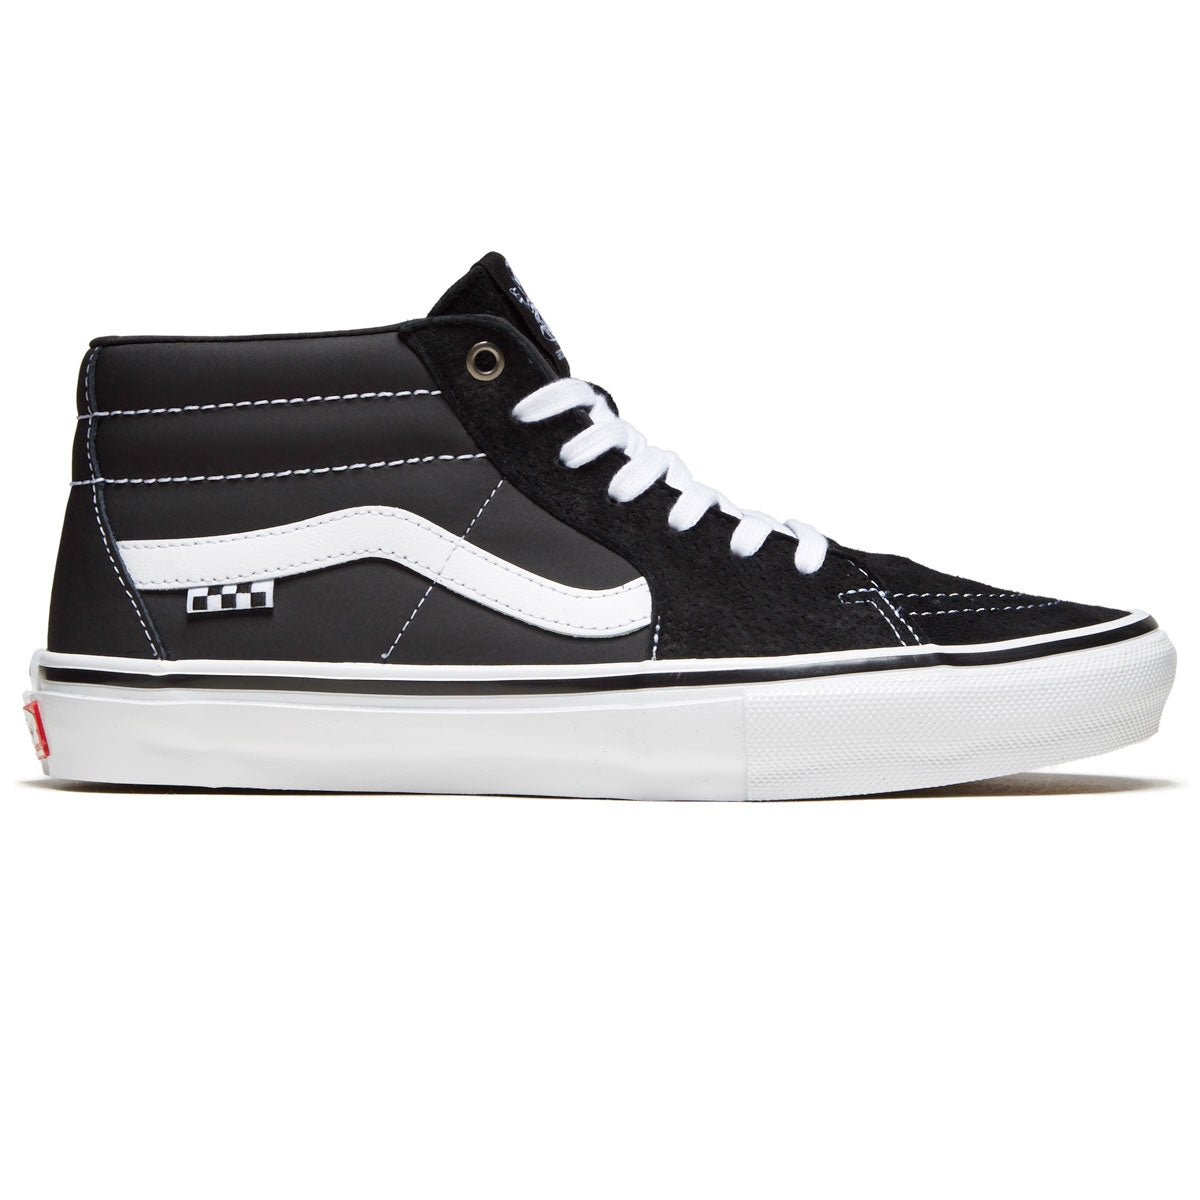 Vans Grosso Sk8 Mid Shoes - Black/White/Emo Leather image 1